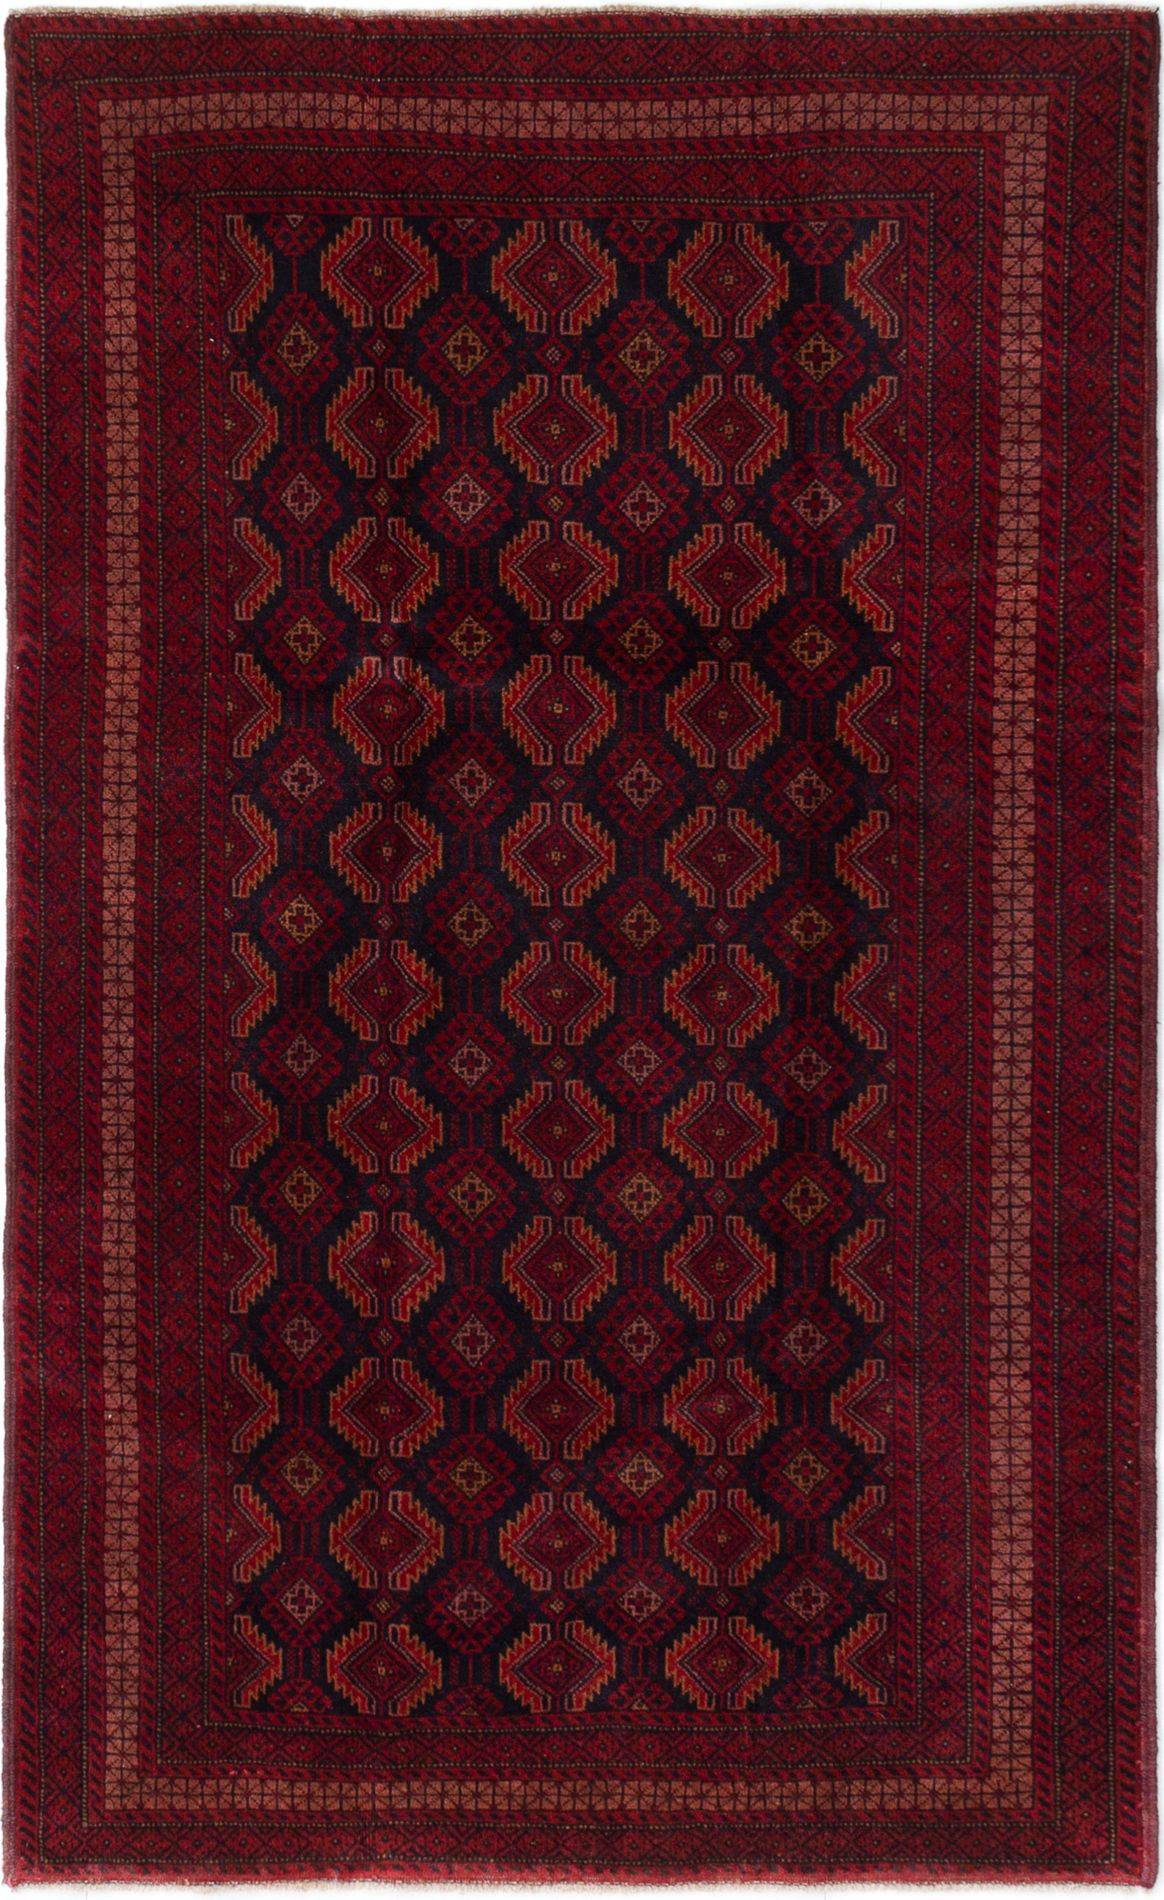 Hand-knotted Teimani Red Wool Rug 3'11" x 6'4" Size: 3'11" x 6'4"  